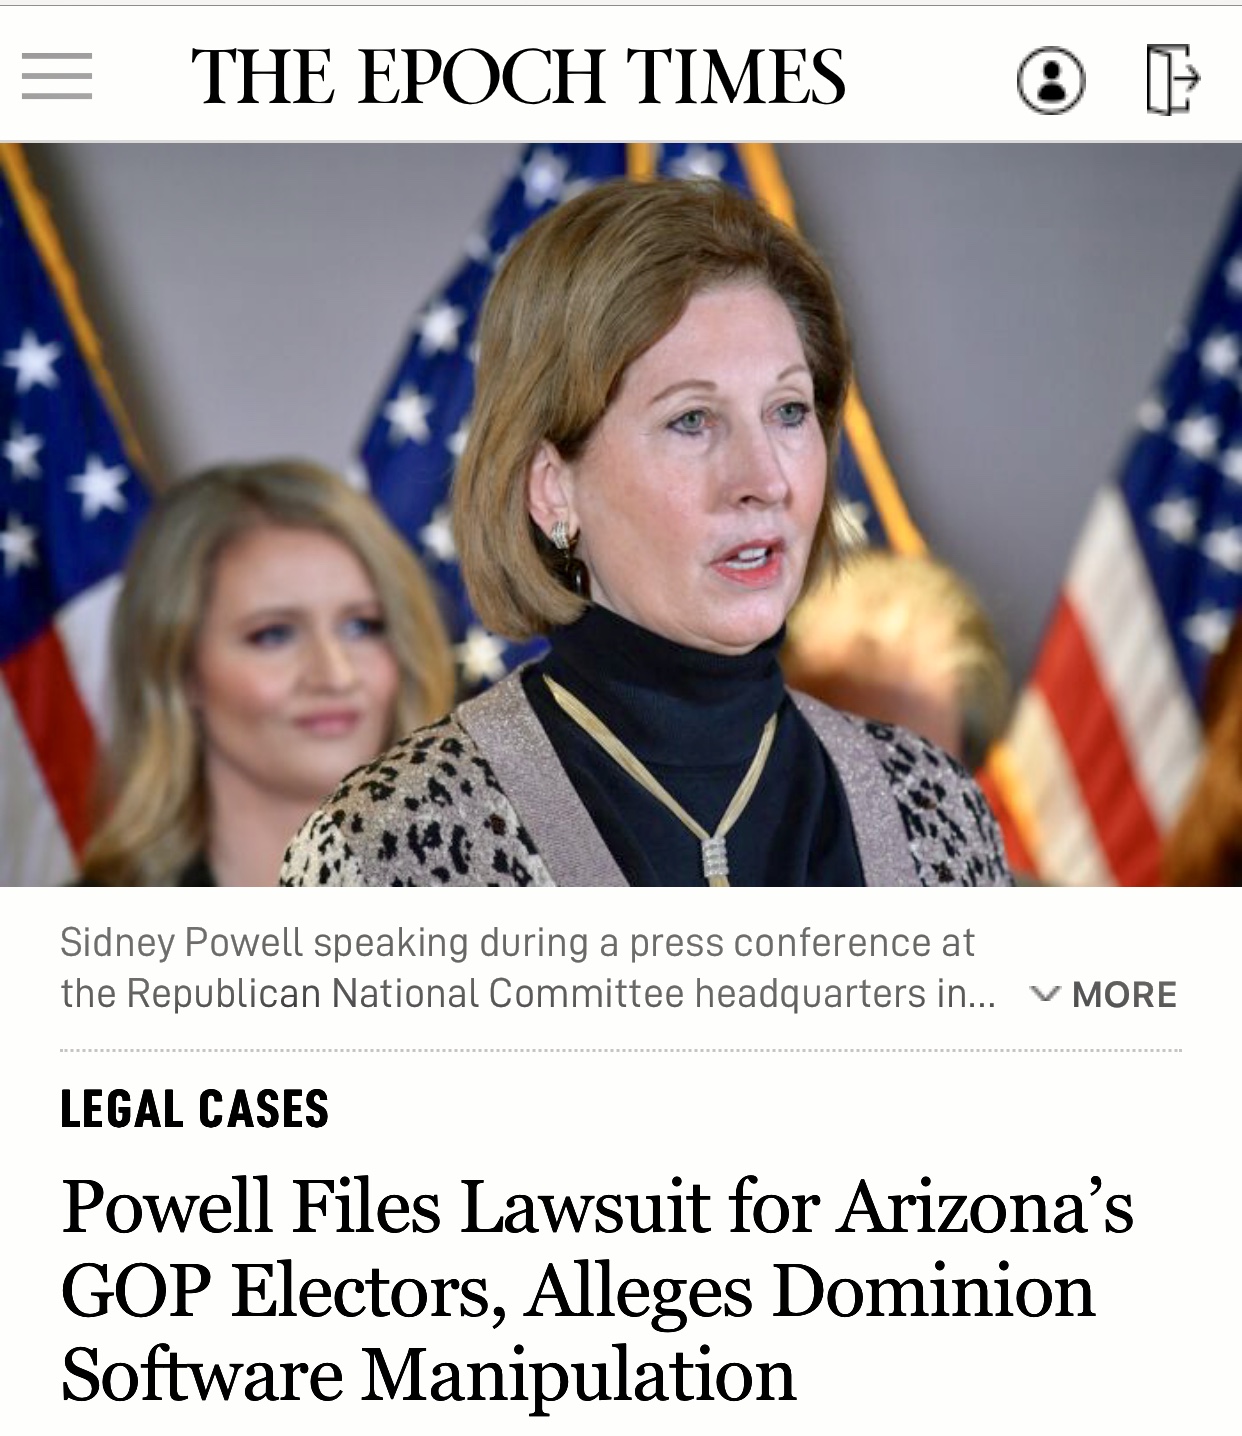 Powell Files Lawsuit for Arizona’s GOP Electors, Alleges Dominion Software Manipulation